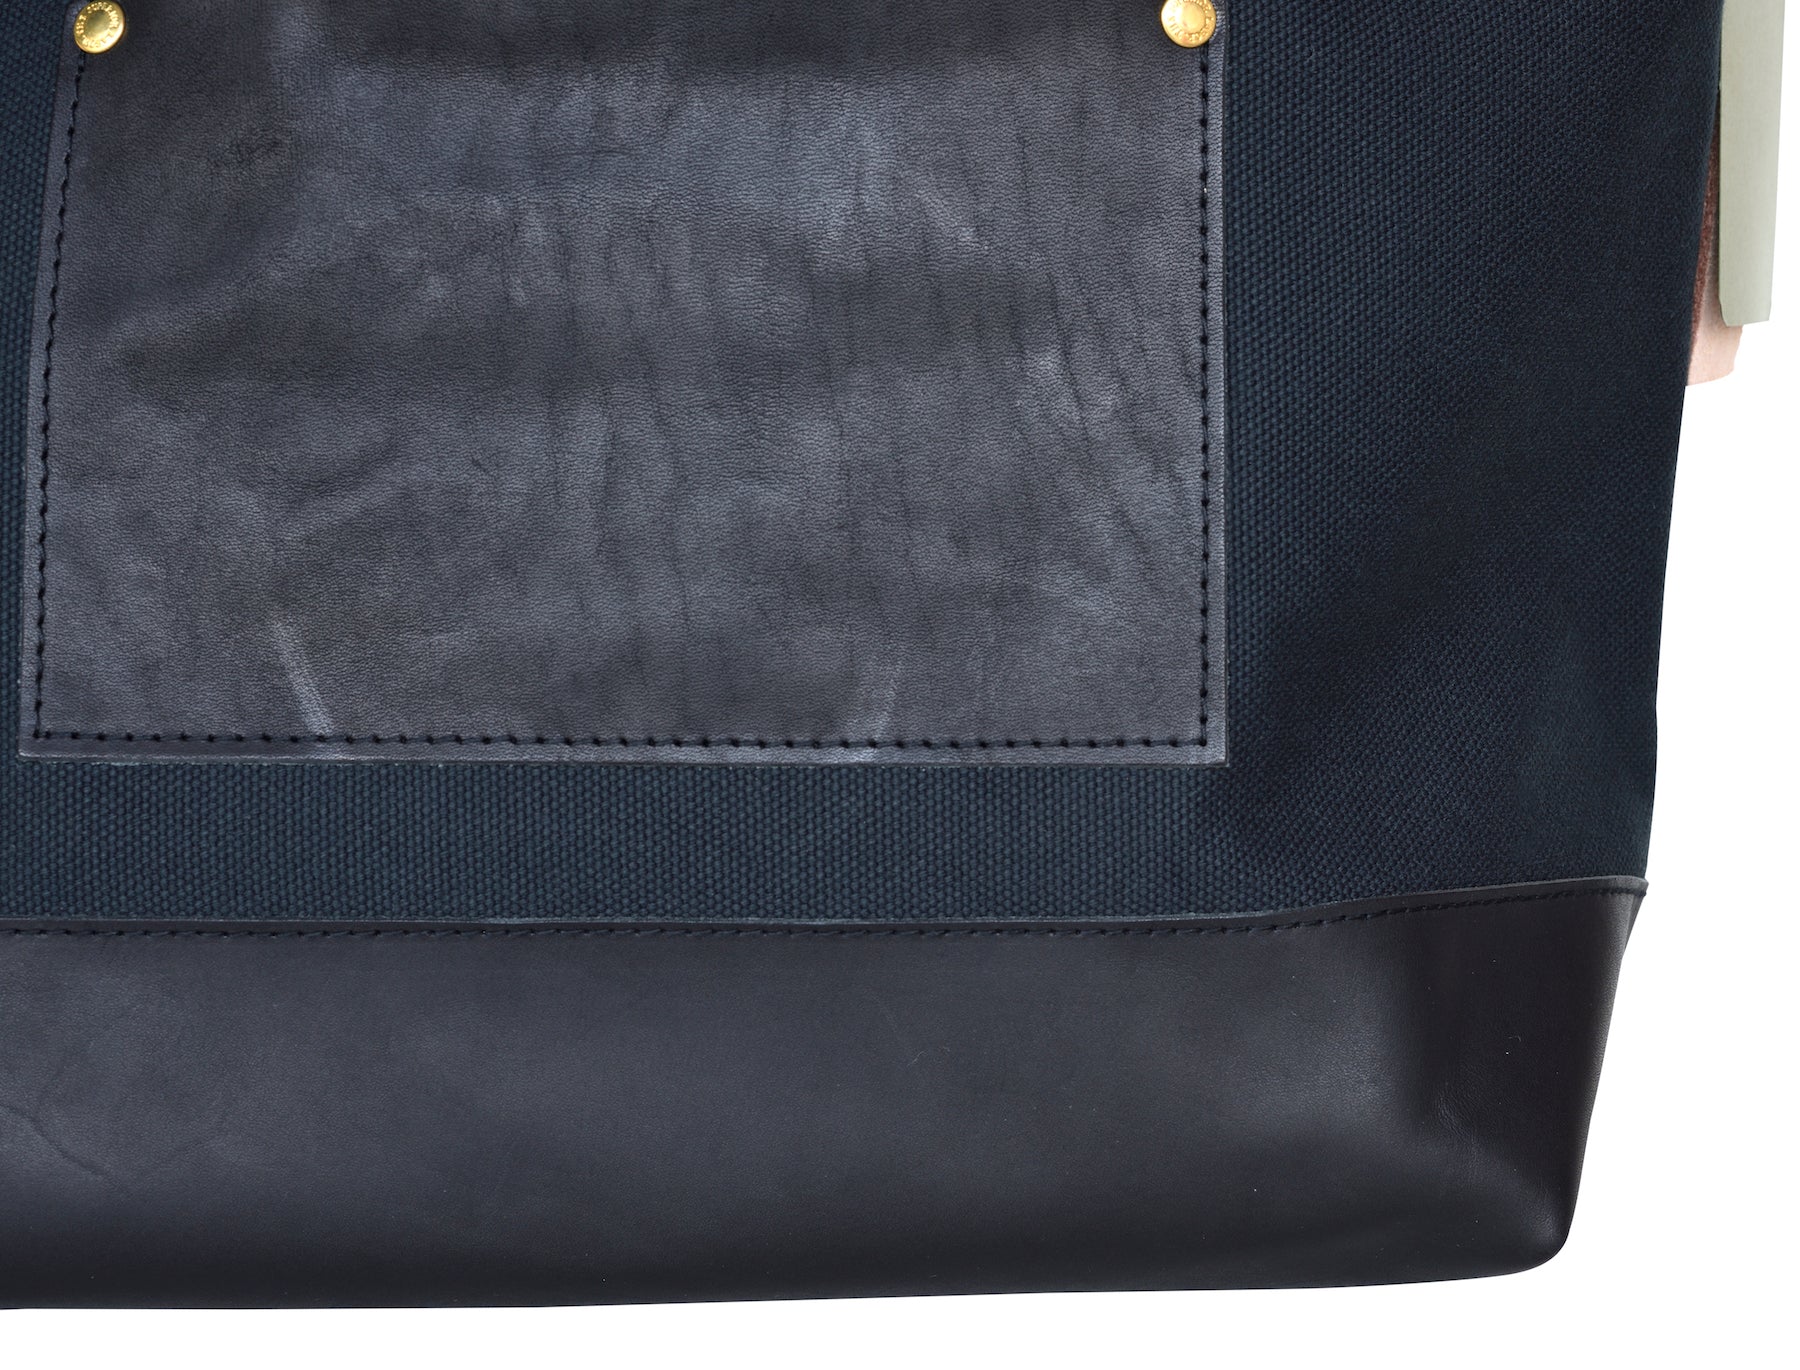 CROOTS DALBY VINTAGE LEATHER CARRYALL BAG (M) (Black) - NOMADO Store